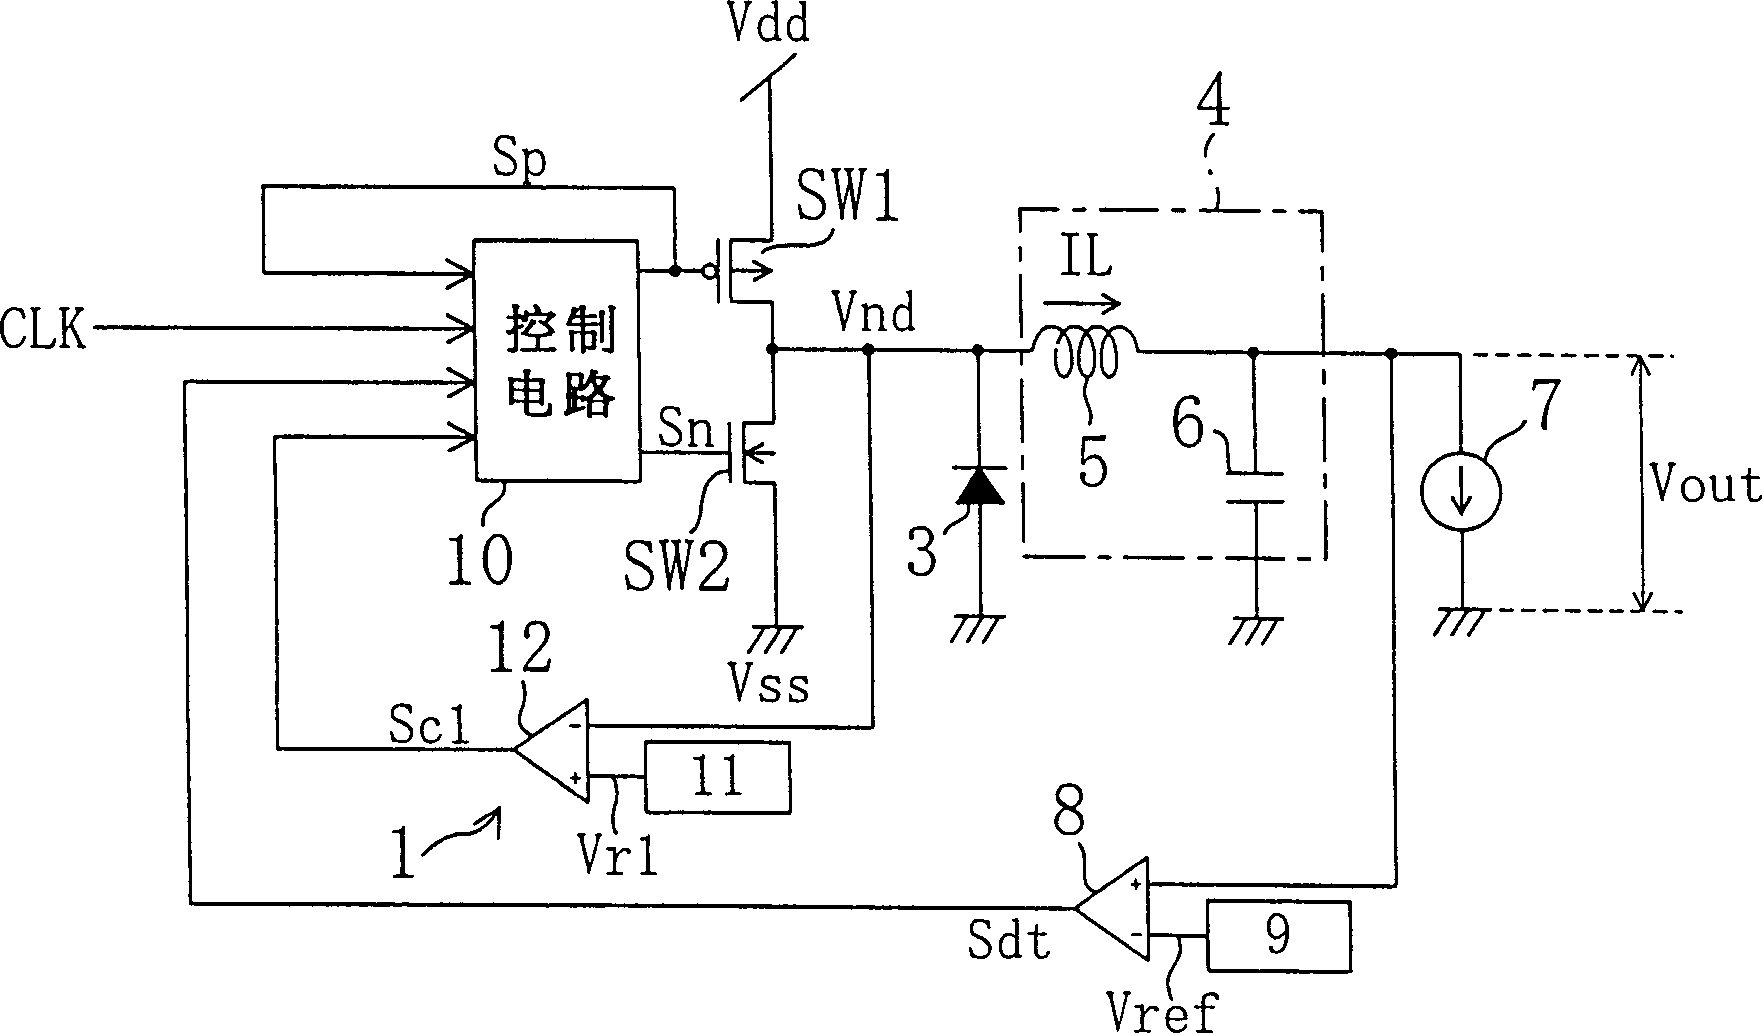 Switching regulator, DC/DC converter, and LSI system with switching regulator